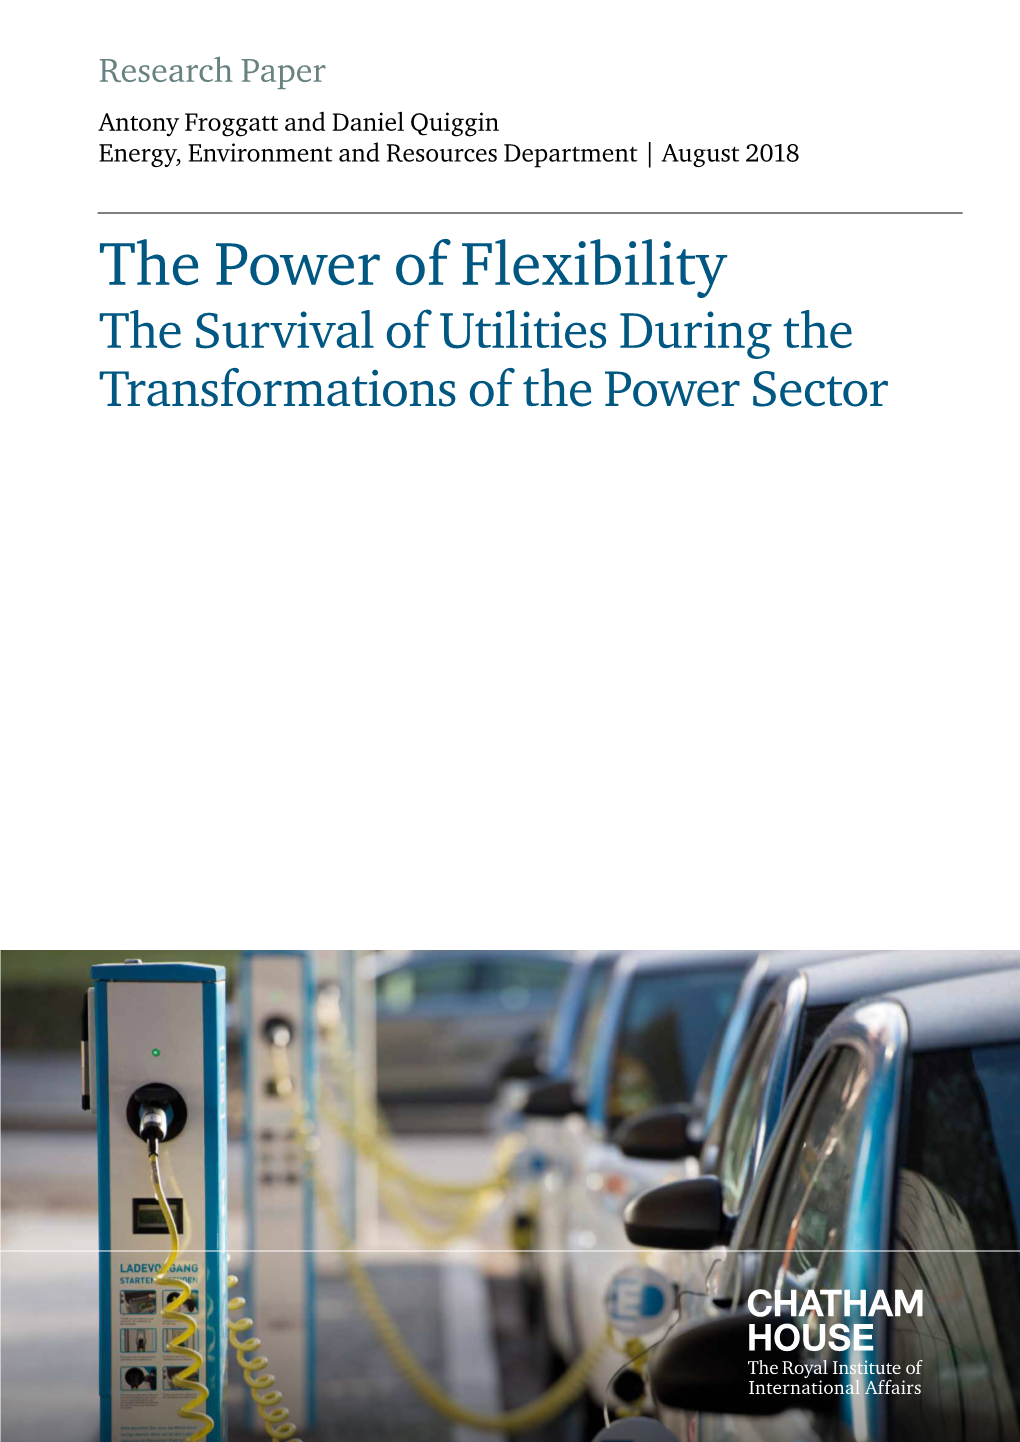 The Power of Flexibility: the Survival of Utilities During the Transformations of the Power Sector